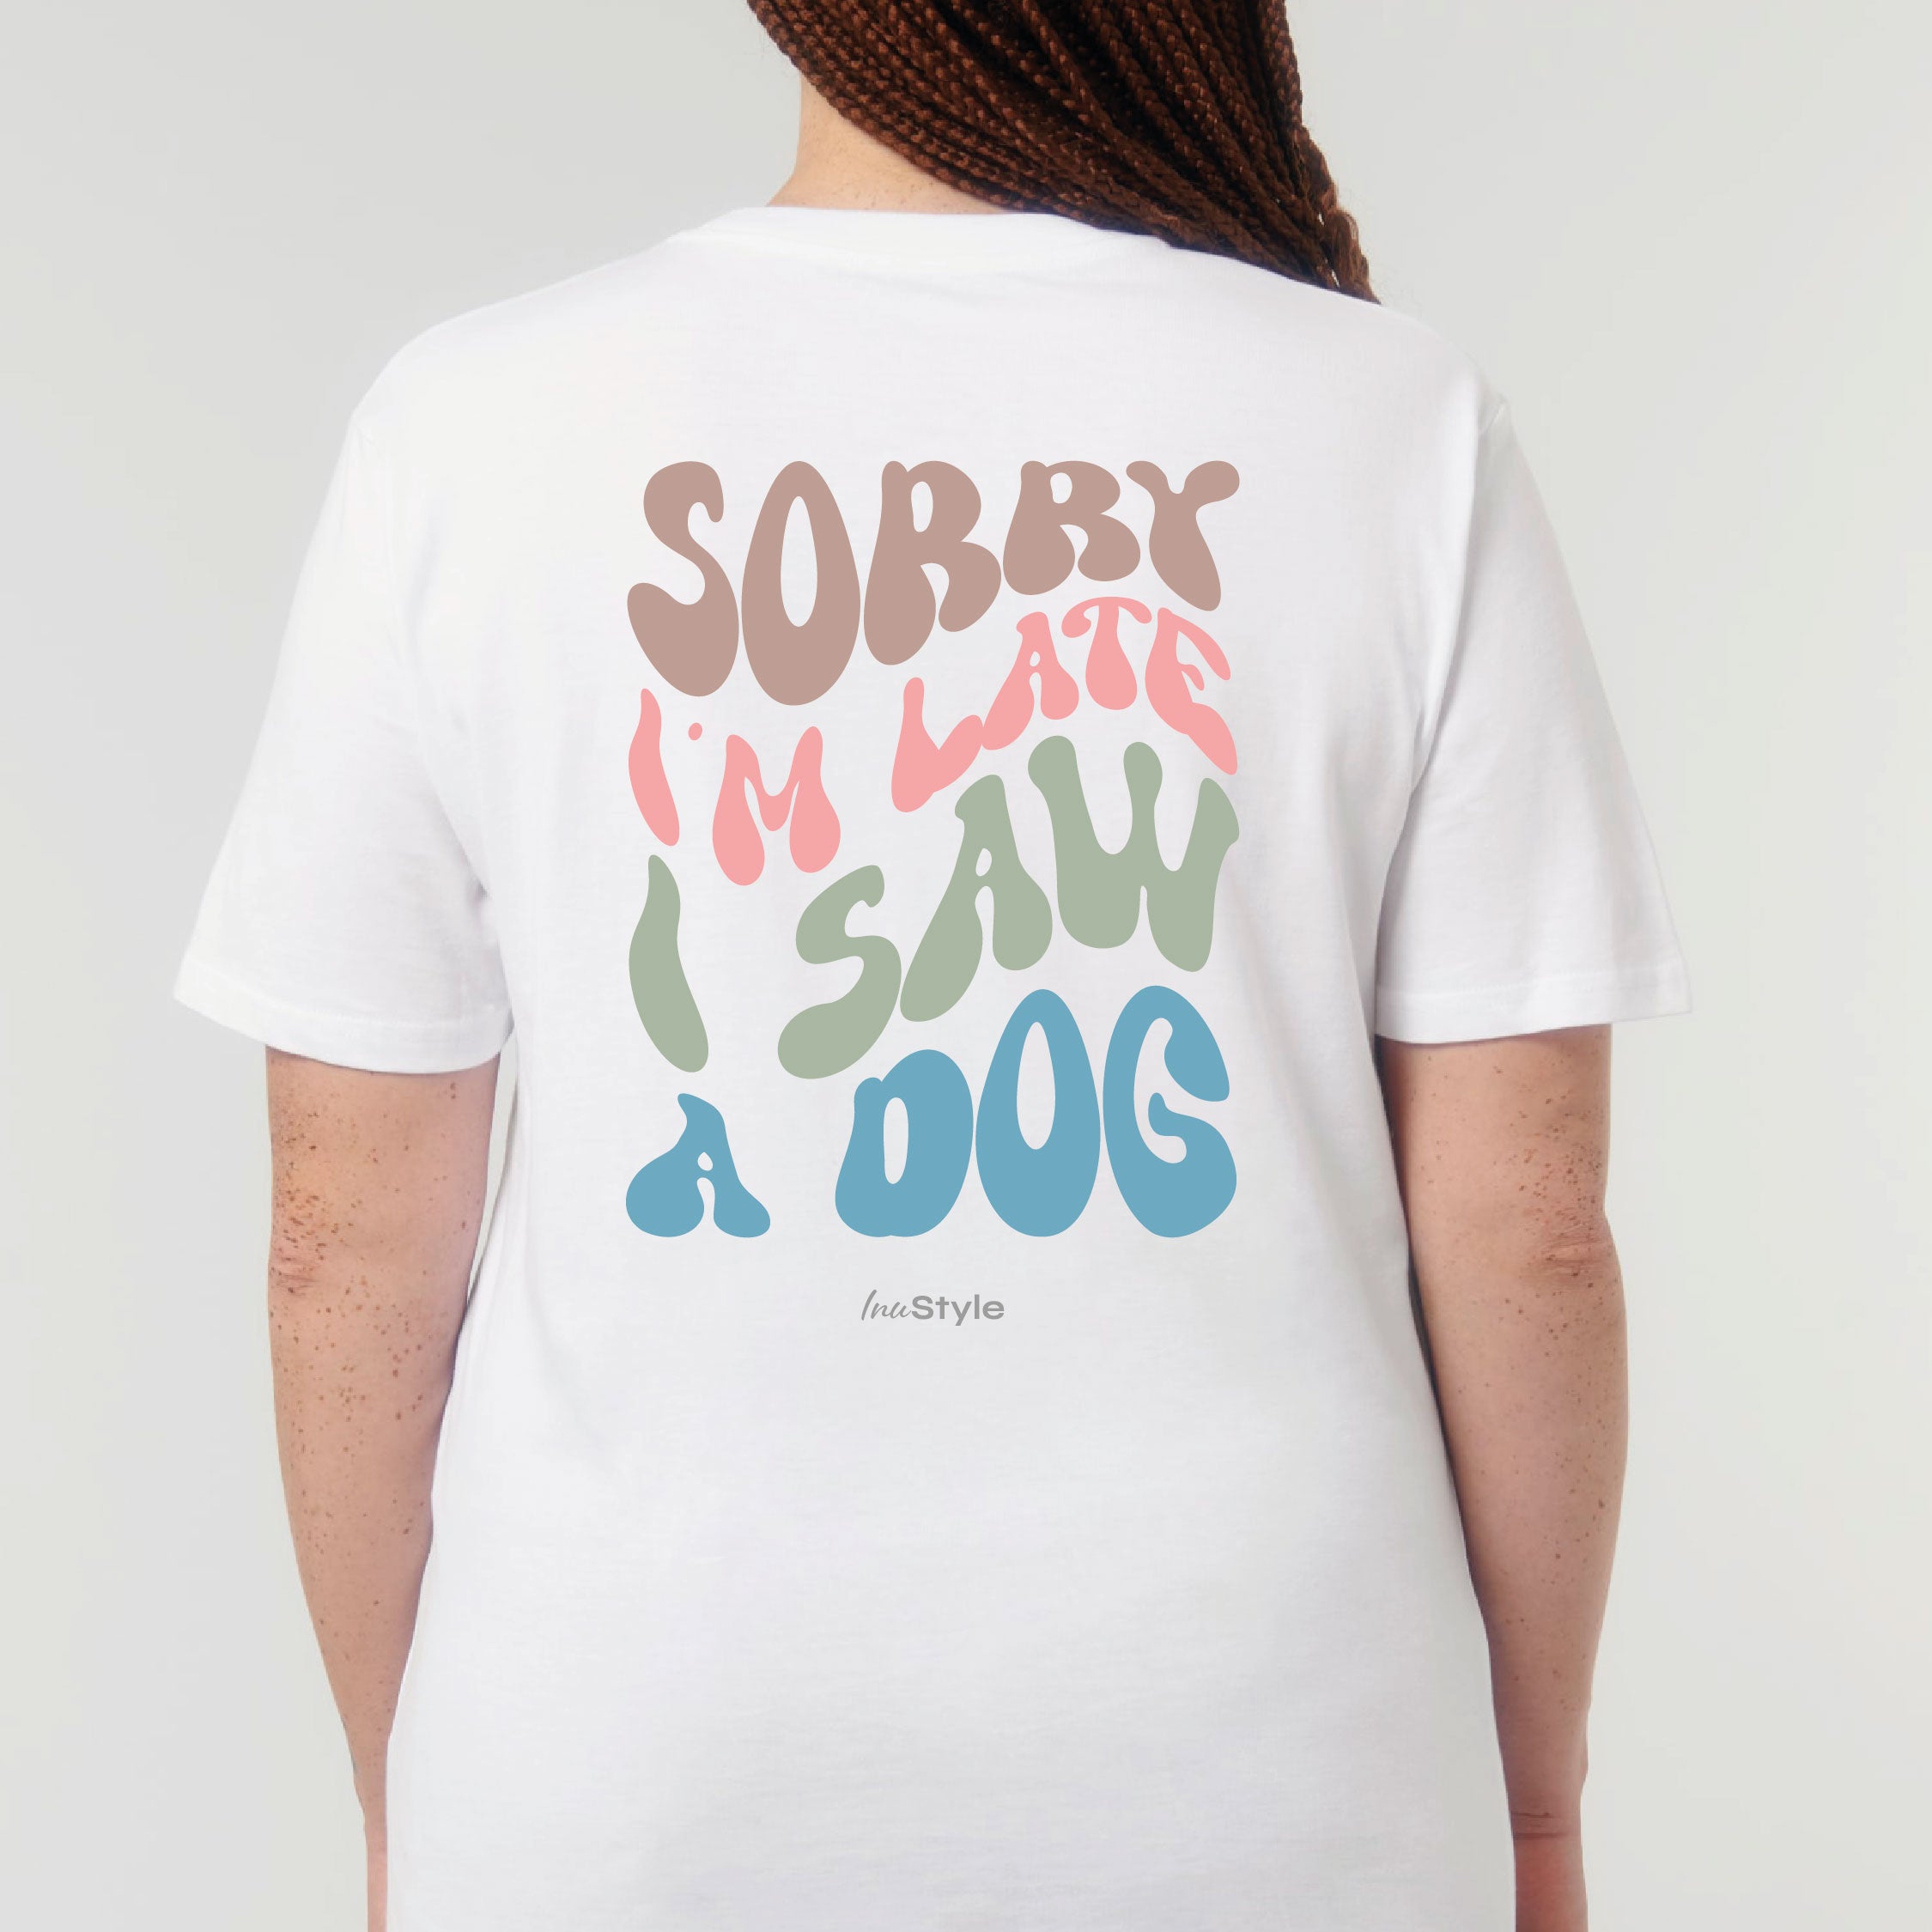 New Inu.style Collection - Sorry I am late. I saw a DOG - Shirt